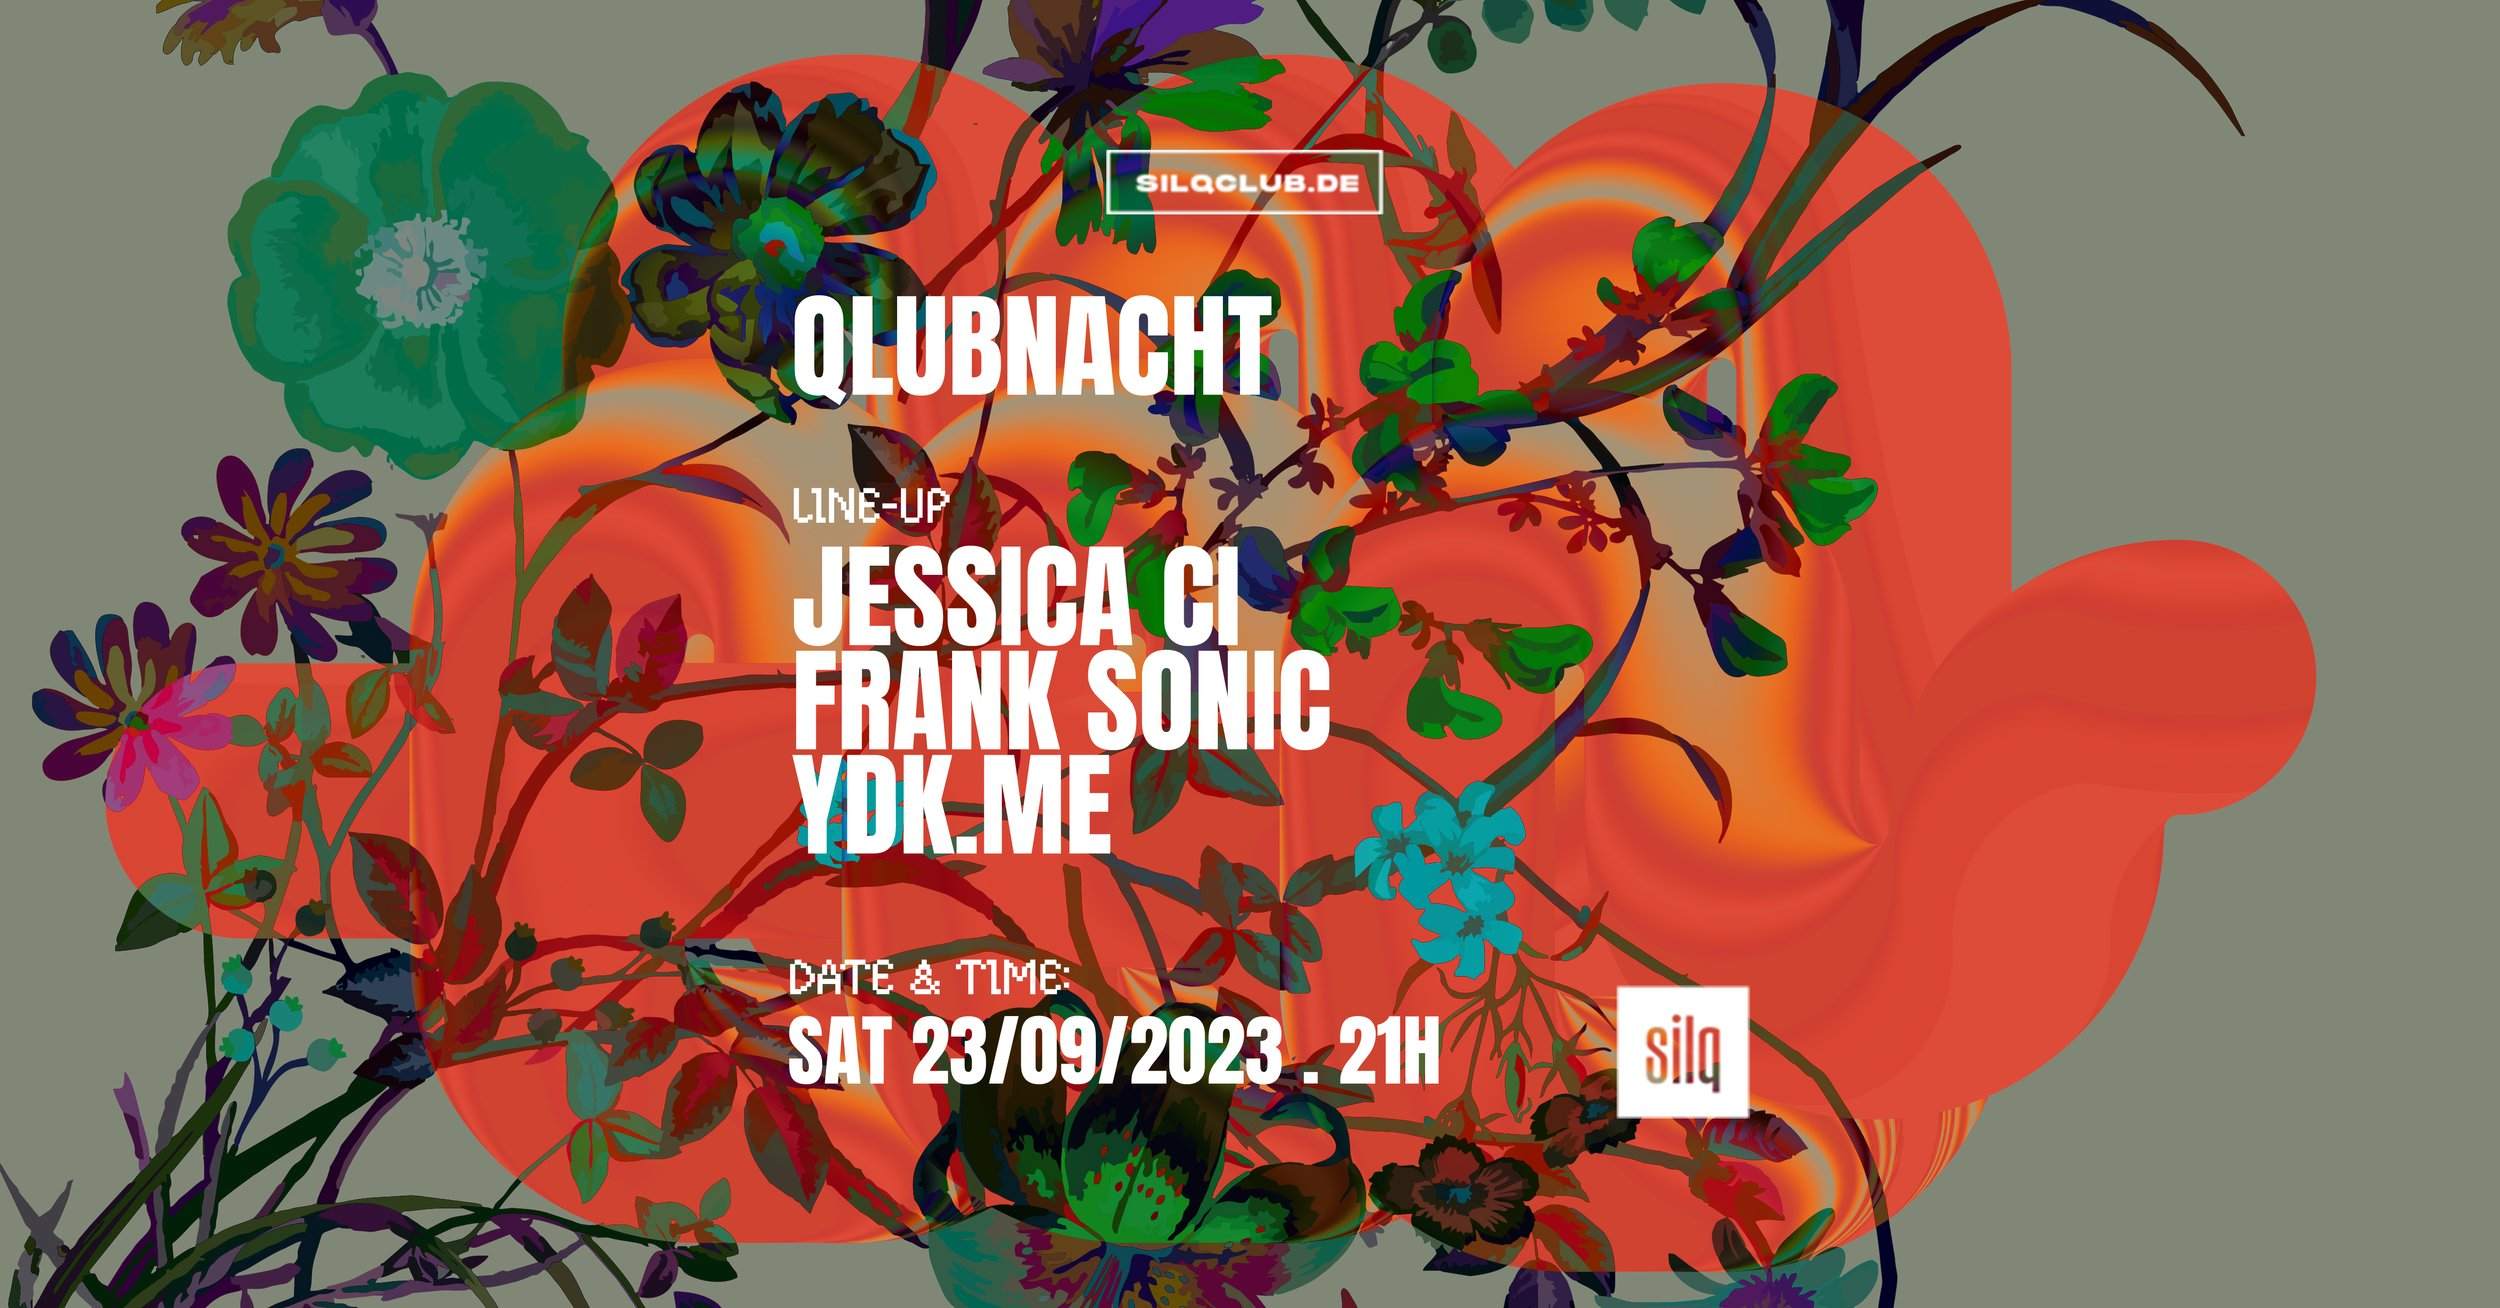 QLUBNACHT with Jessica Ci, Frank Sonic, Ydk.Me - フライヤー表